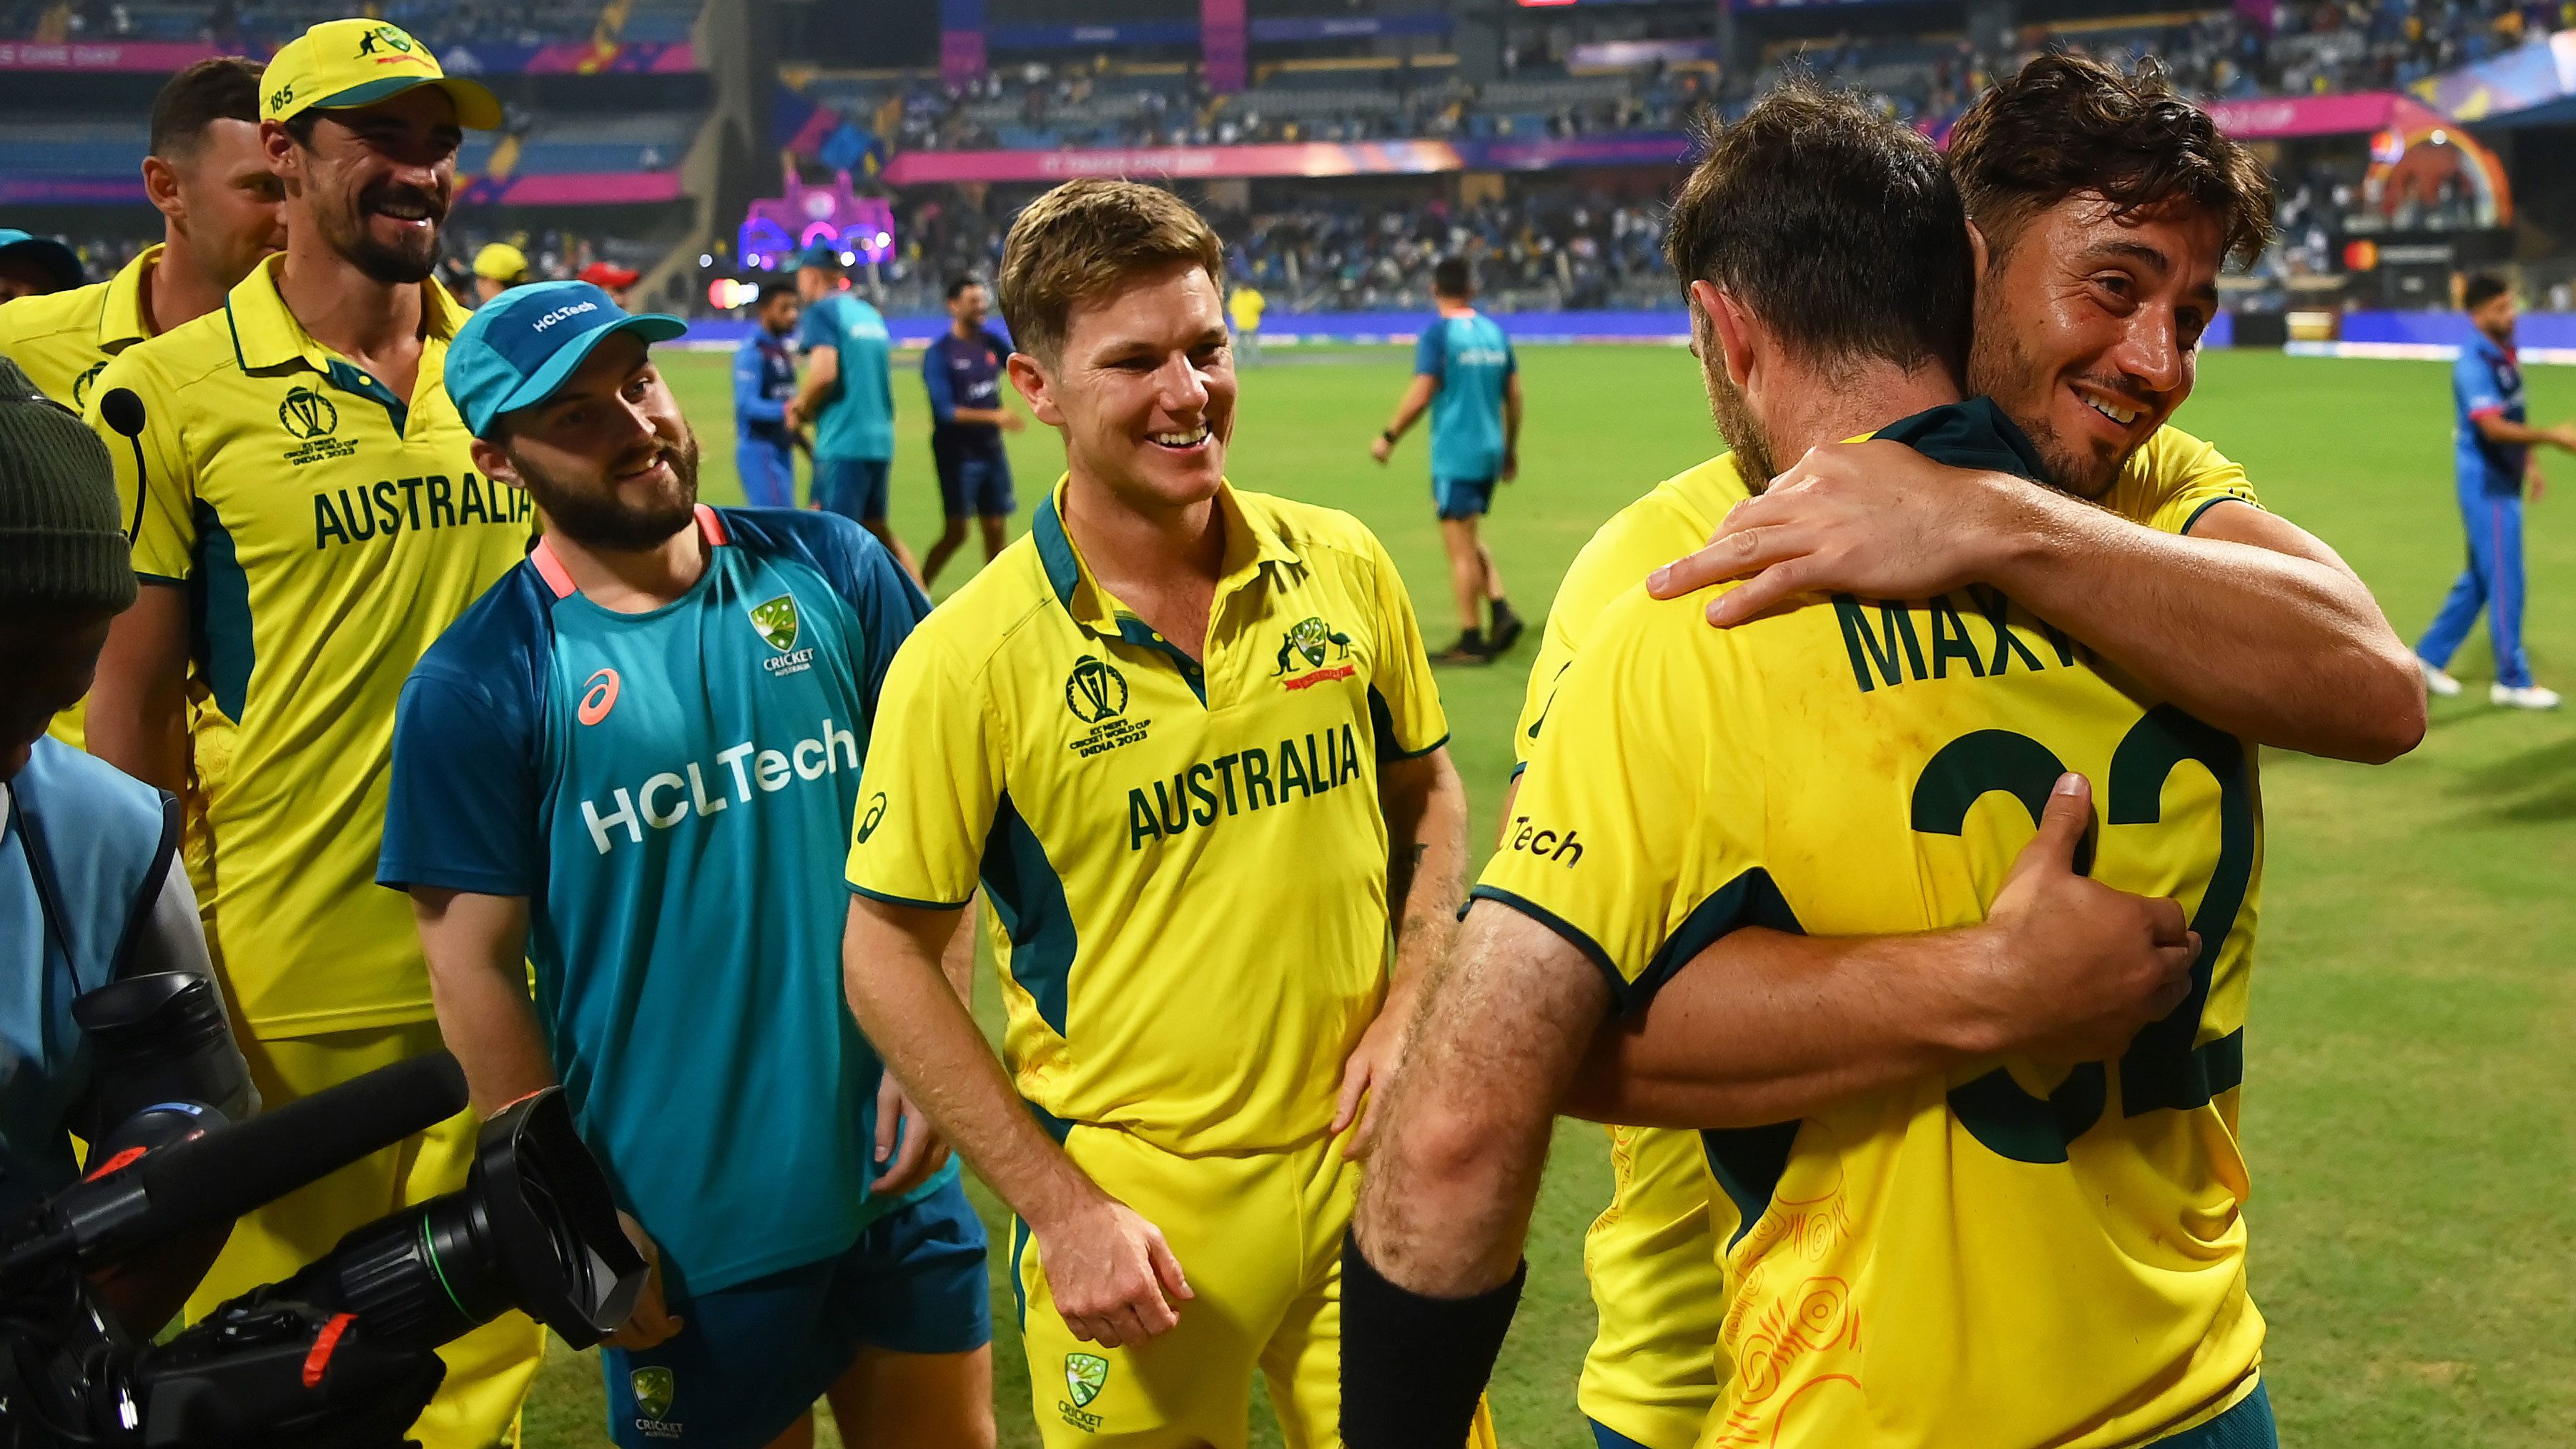 Marcus Stoinis gives Glenn Maxwell a congratulatory hug as Australia celebrate following a stunning win over Afghanistan.